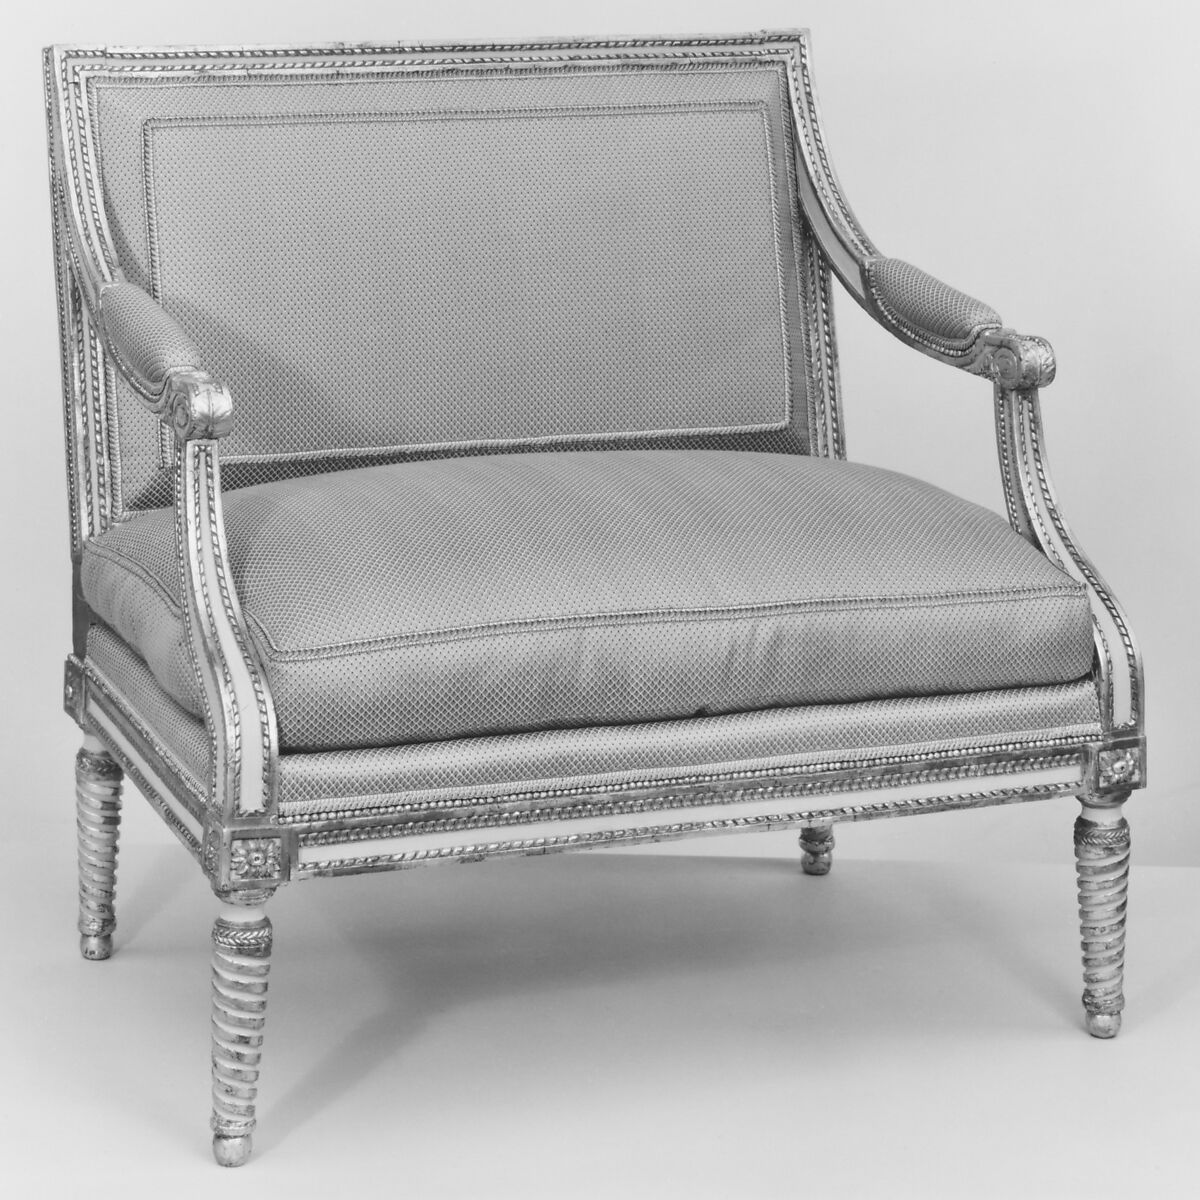 Small settee (marquise), Sulpice Brizard (ca. 1735–after 1798, master 1762), Carved and gilded beechwood, French, Paris 